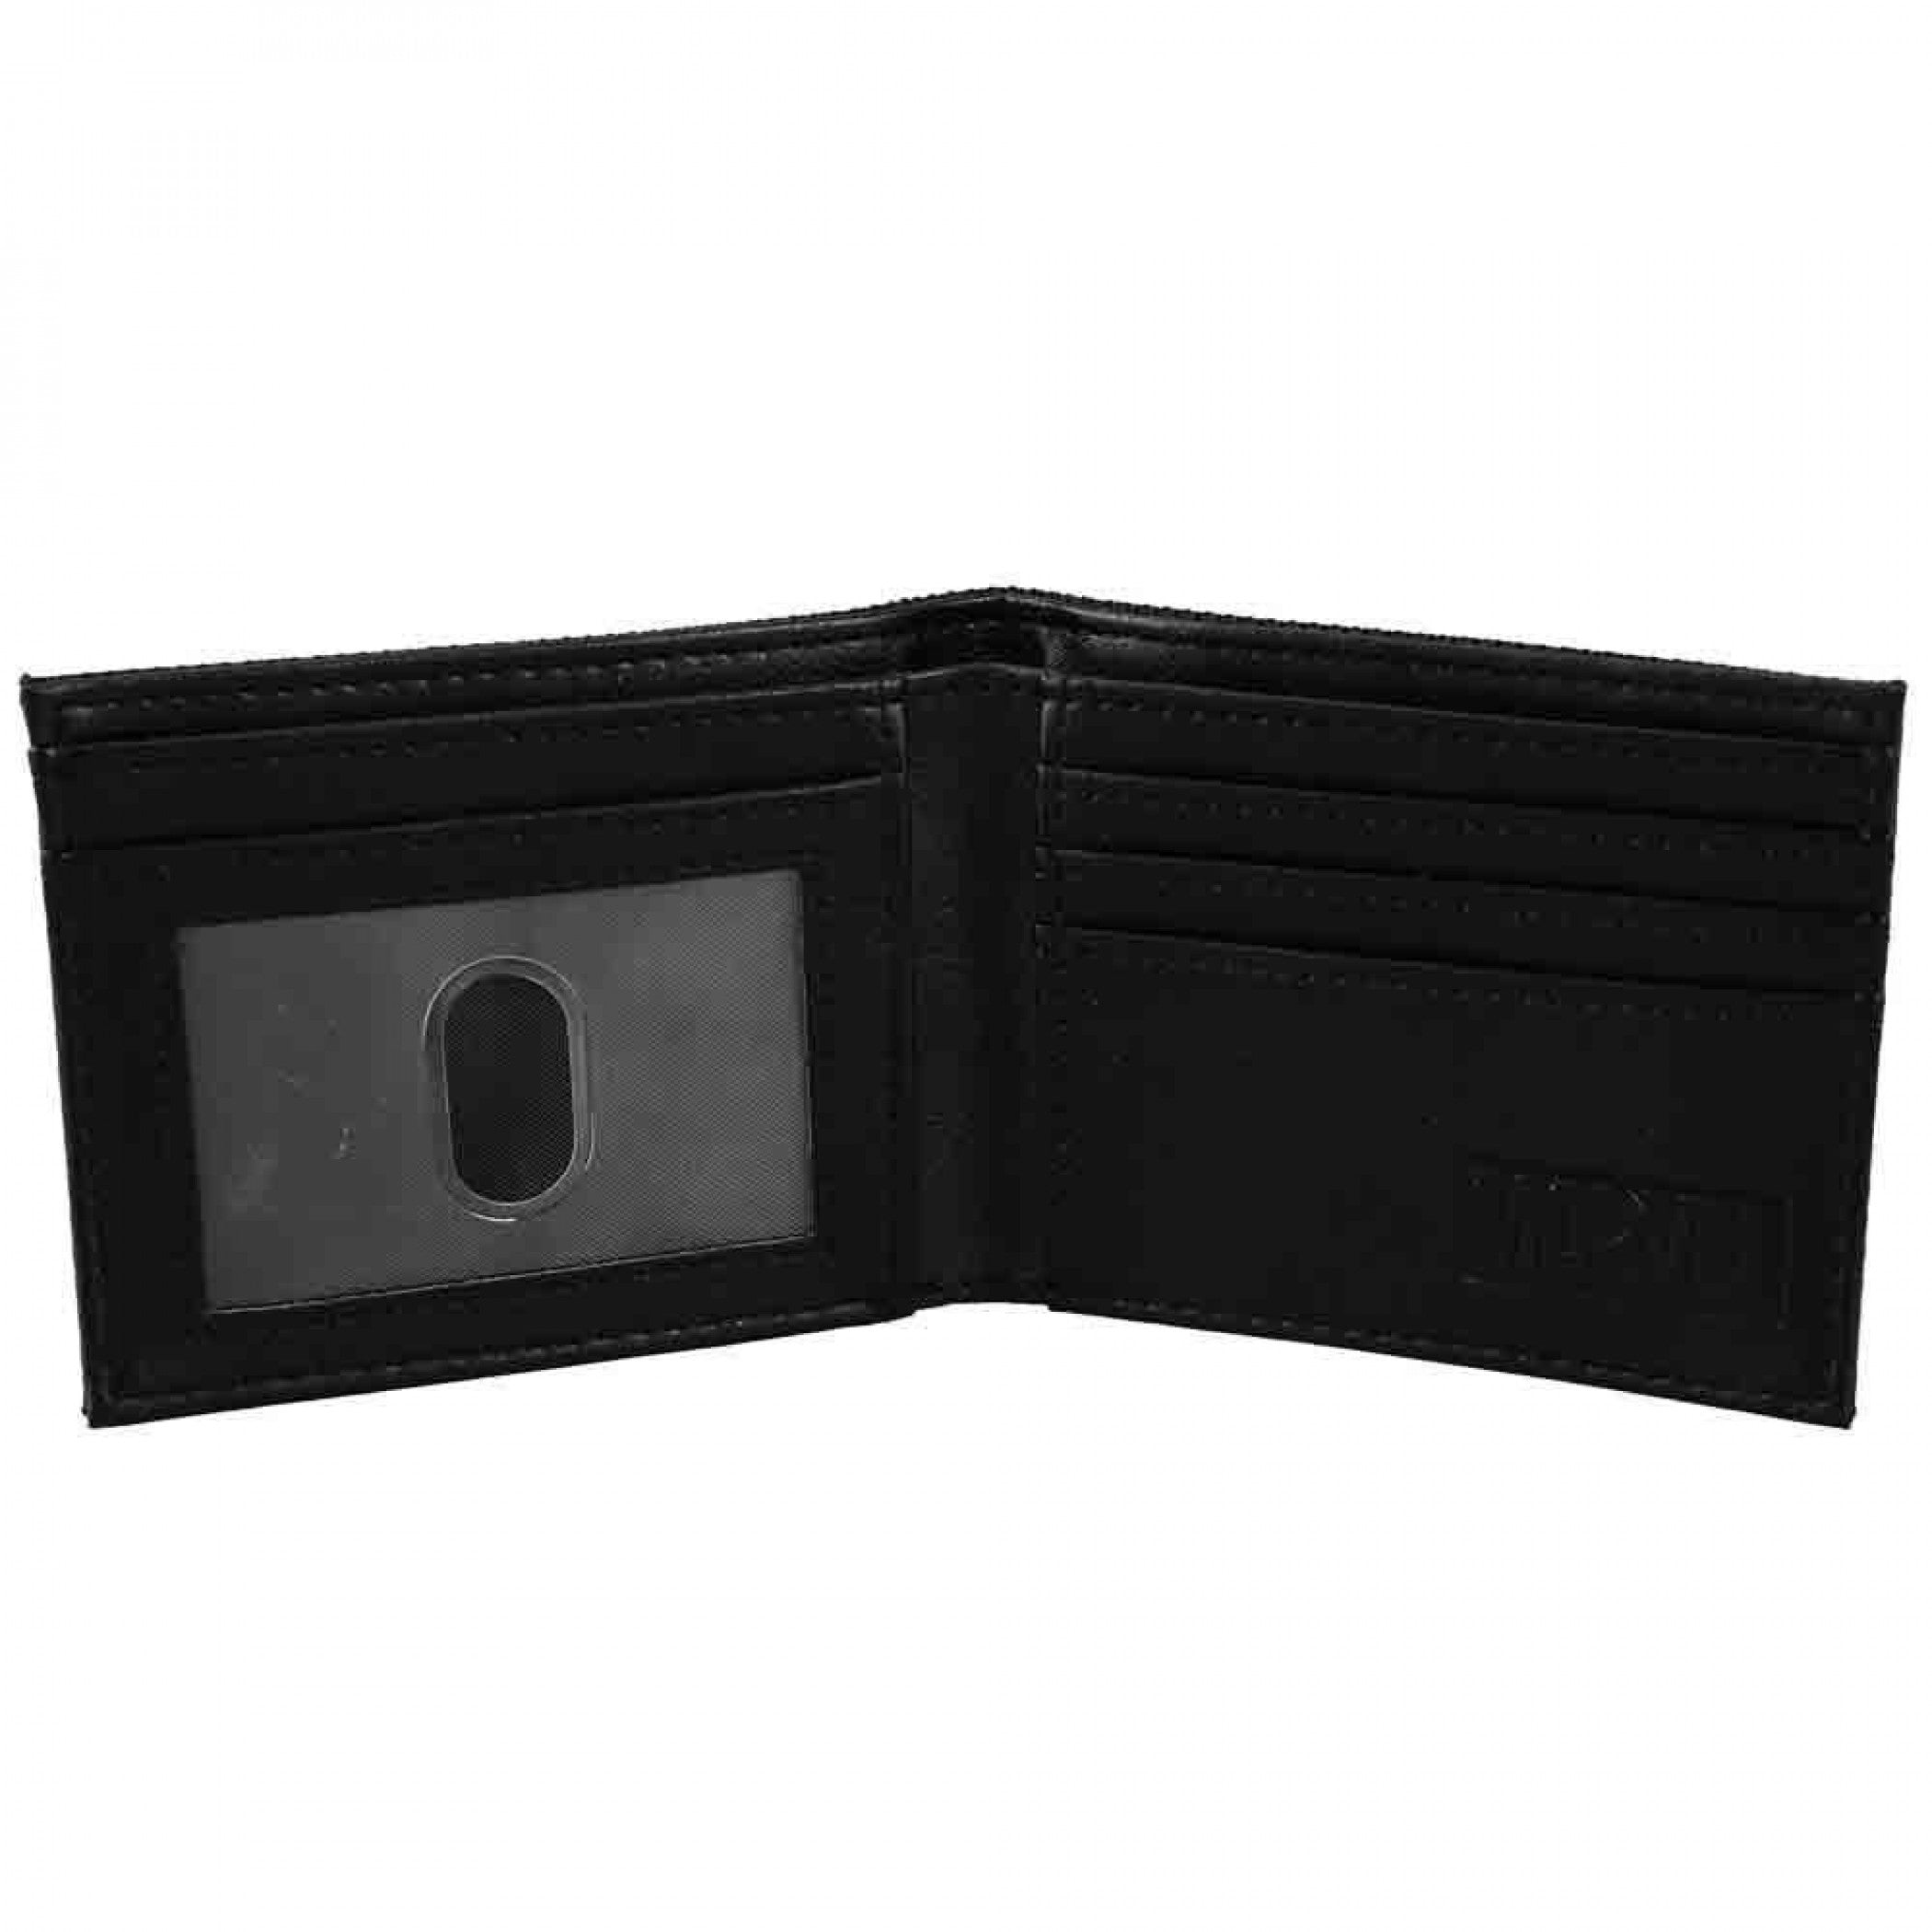 title:Shang-Chi and the Legend of the Ten Rings Marvel Comics Bi-Fold Wallet;color:Black